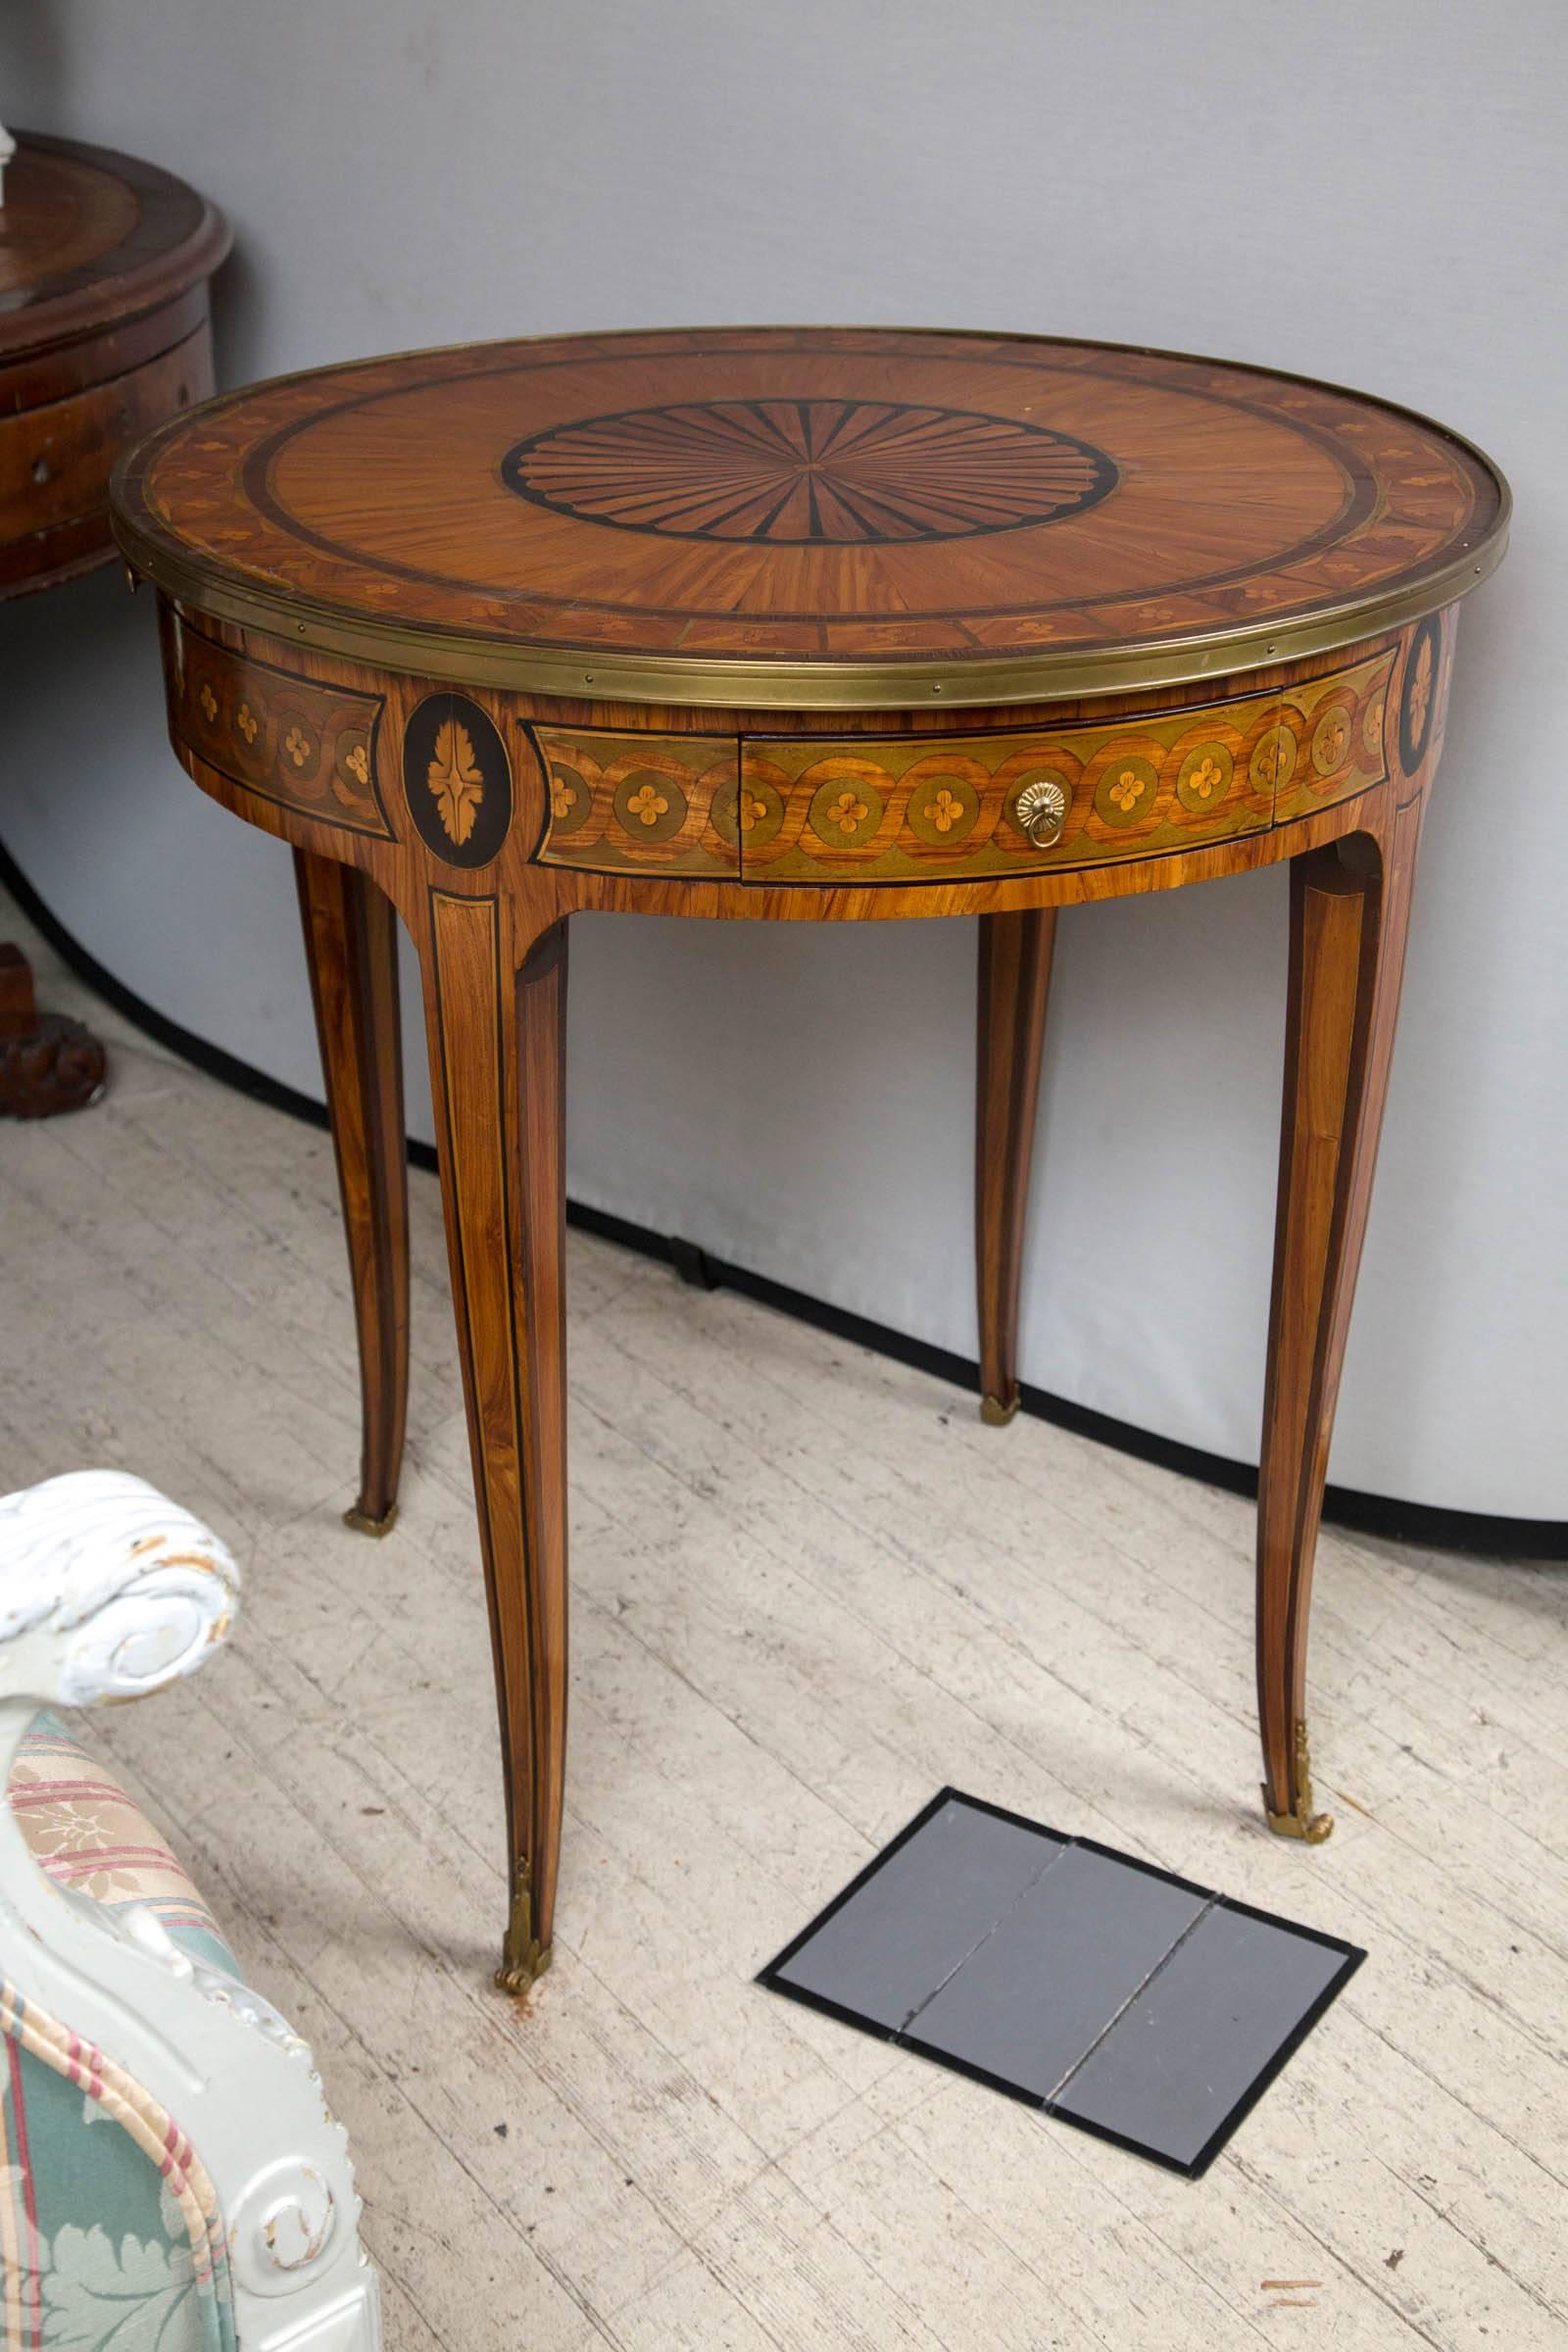 A fruitwood table with ebony, sycamore and satin wood marquetry. In the transitional style. (Louis xv-louis xvi) there are two opposing drawers and two opposing candle slides. Tapering legs ending in bronze sabots. Brass ring pulls. Brass edge.